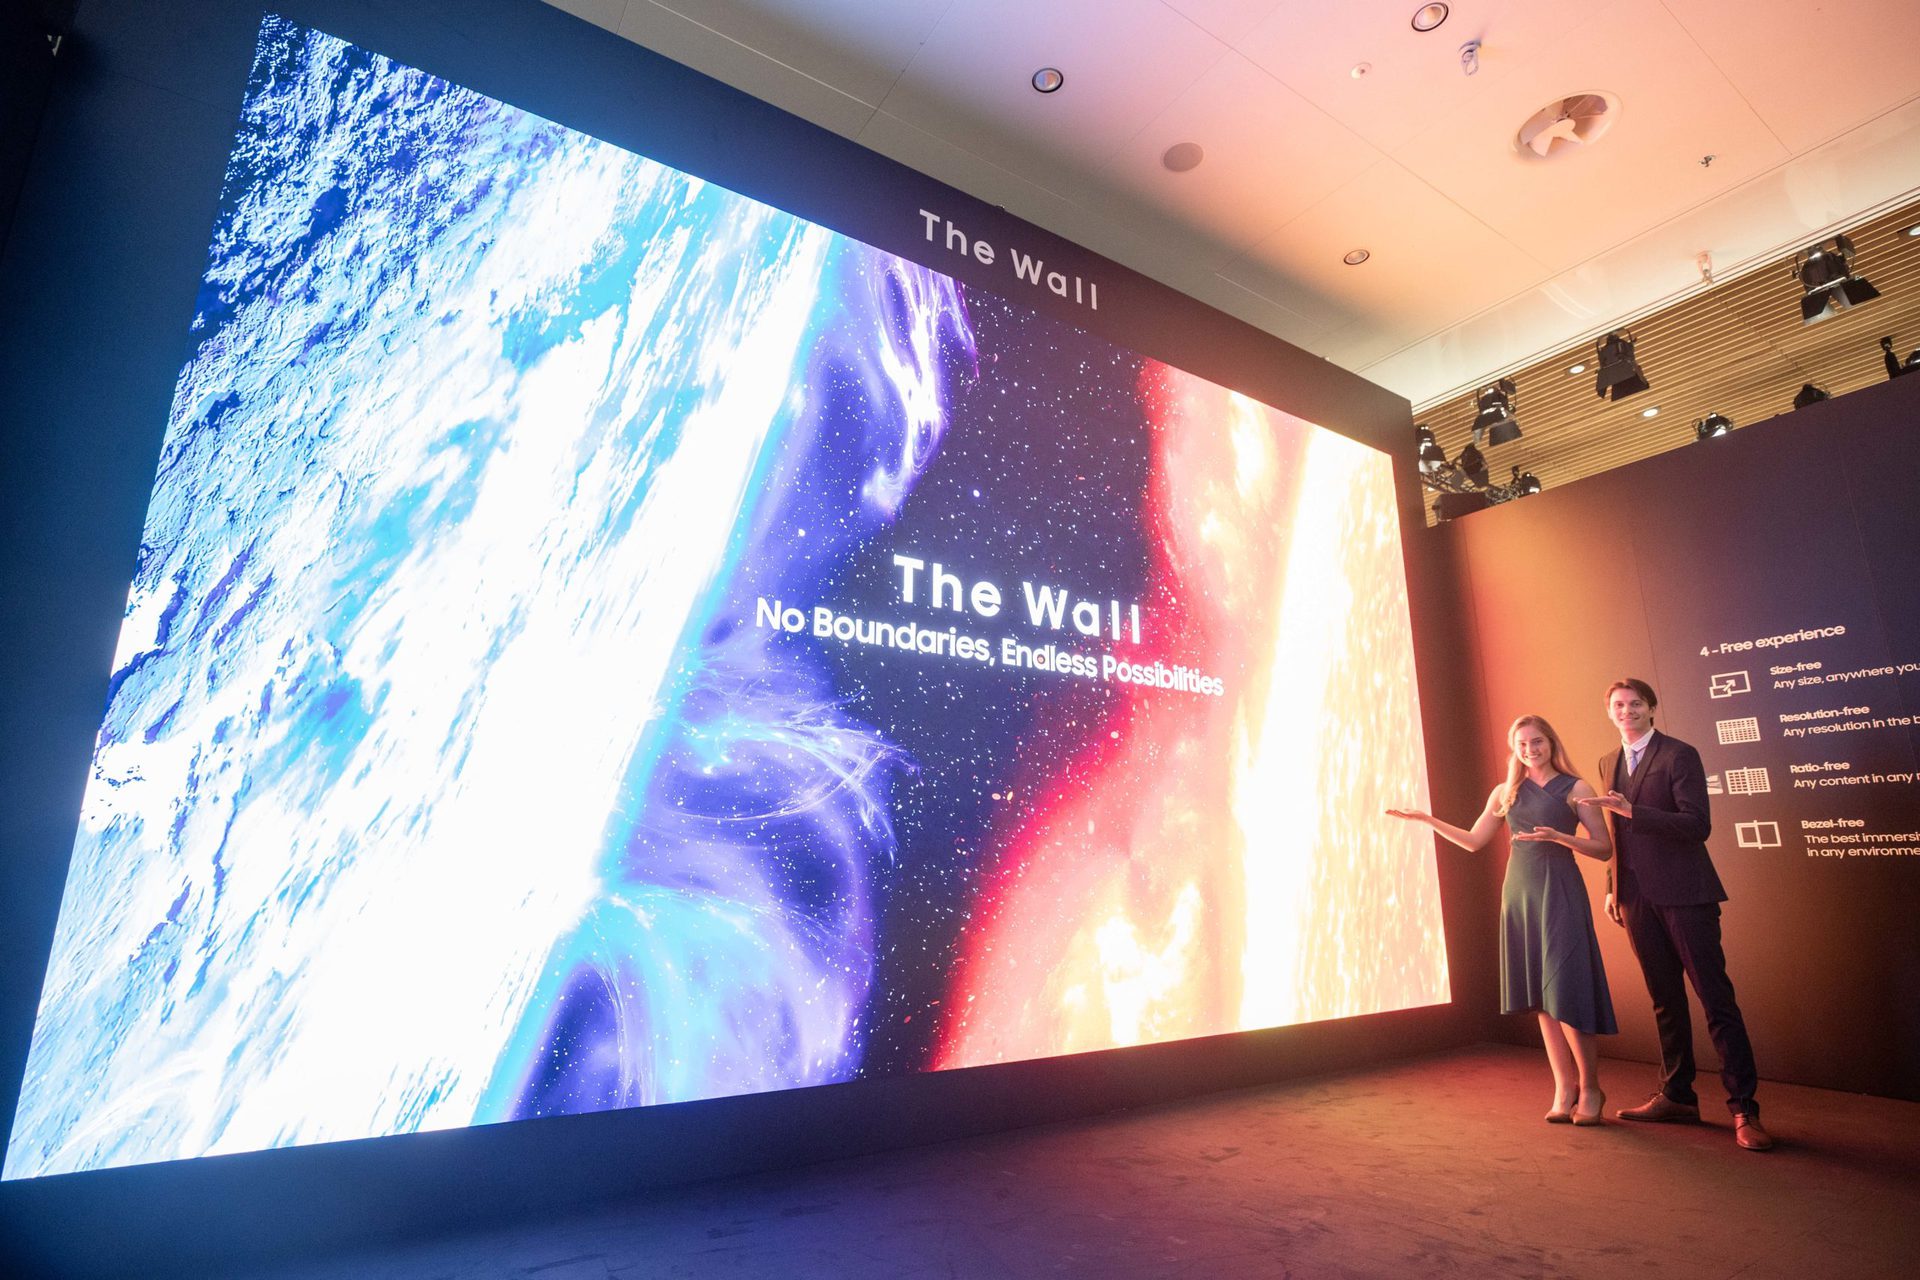 Samsung's The Wall microLED display at a trade show